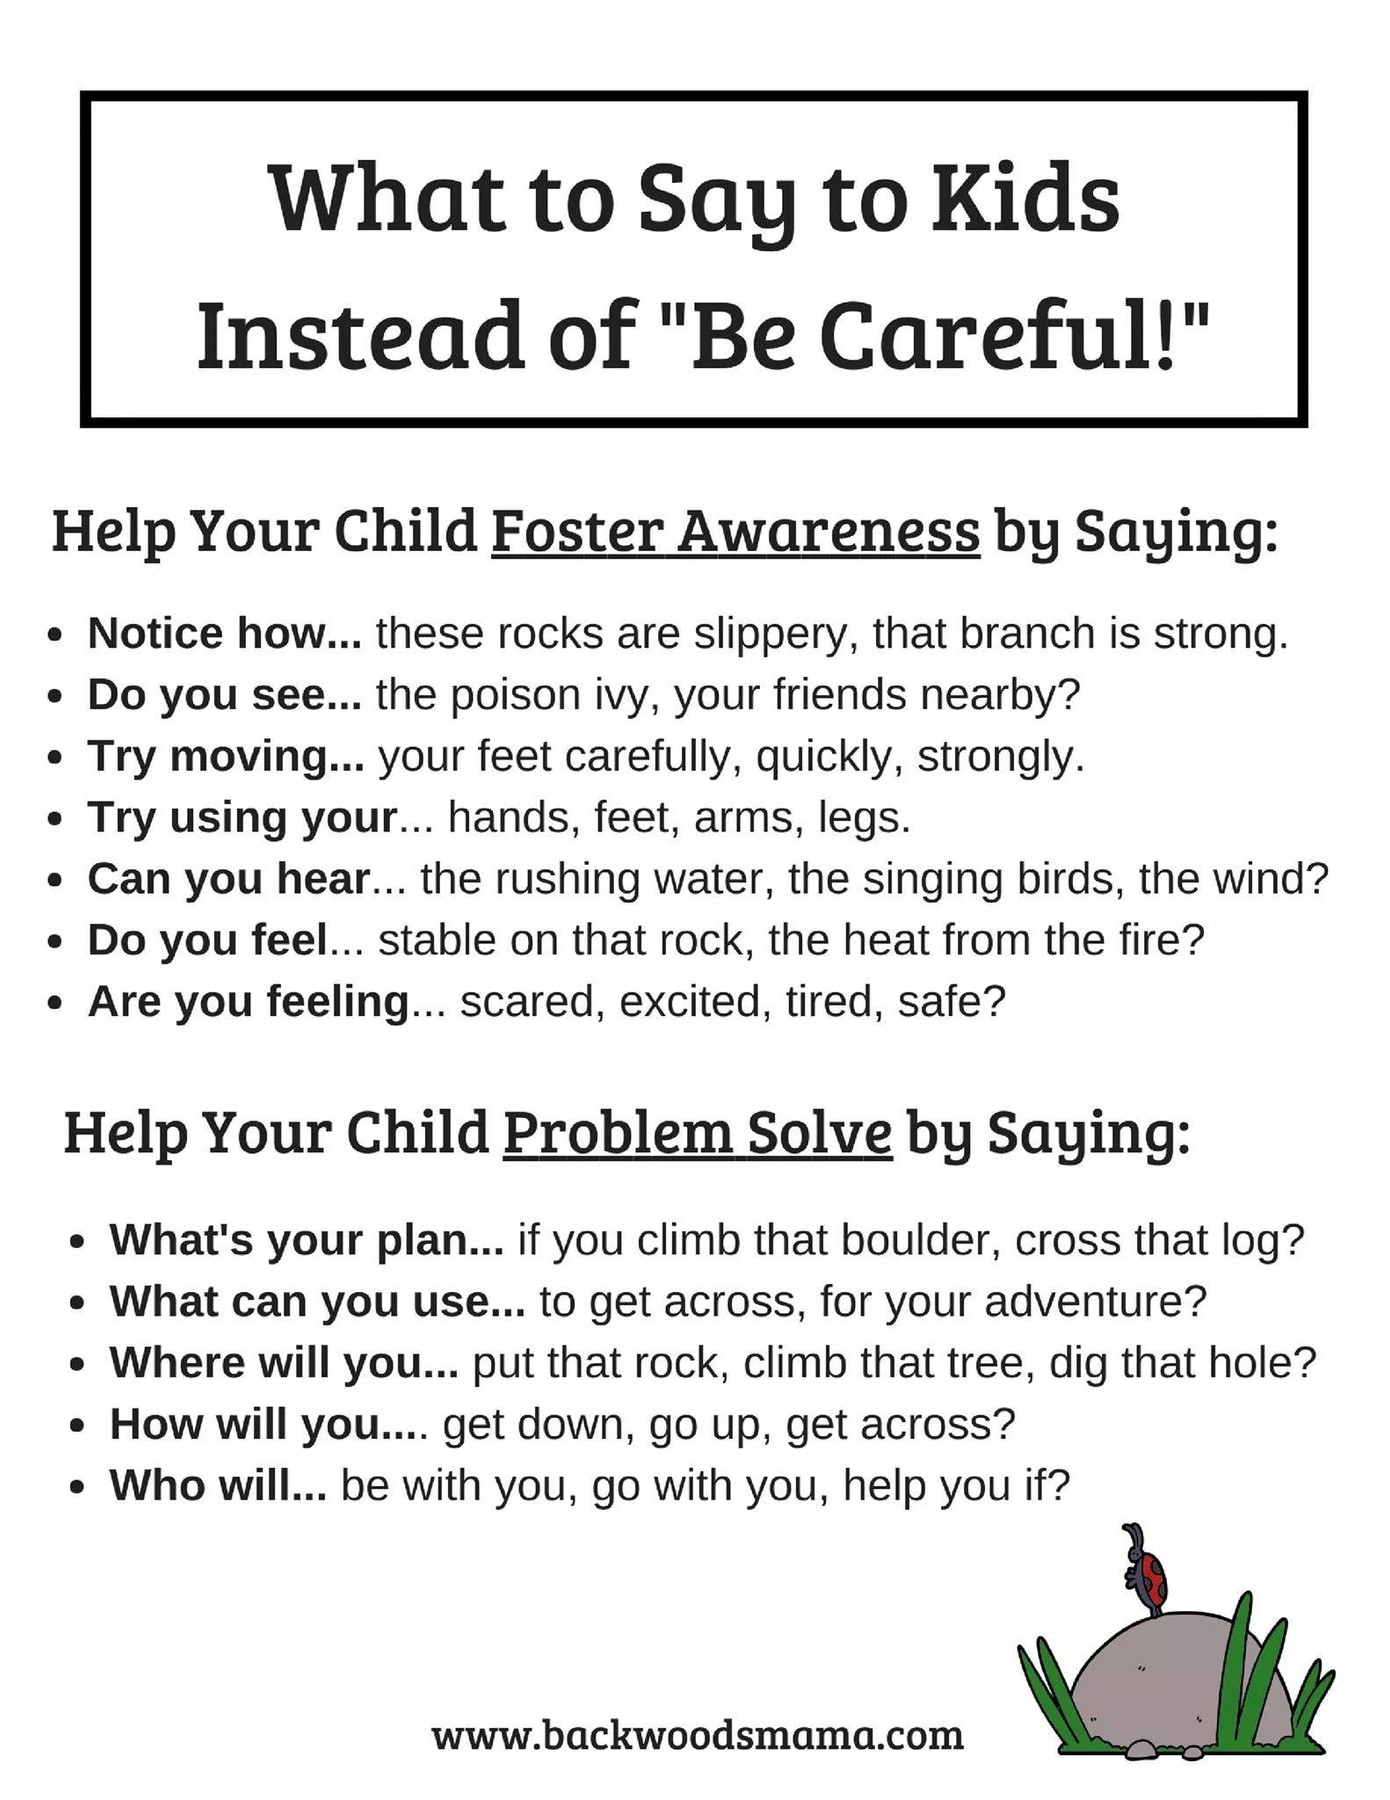 What to Say To Kids Instead of "Be Careful!"